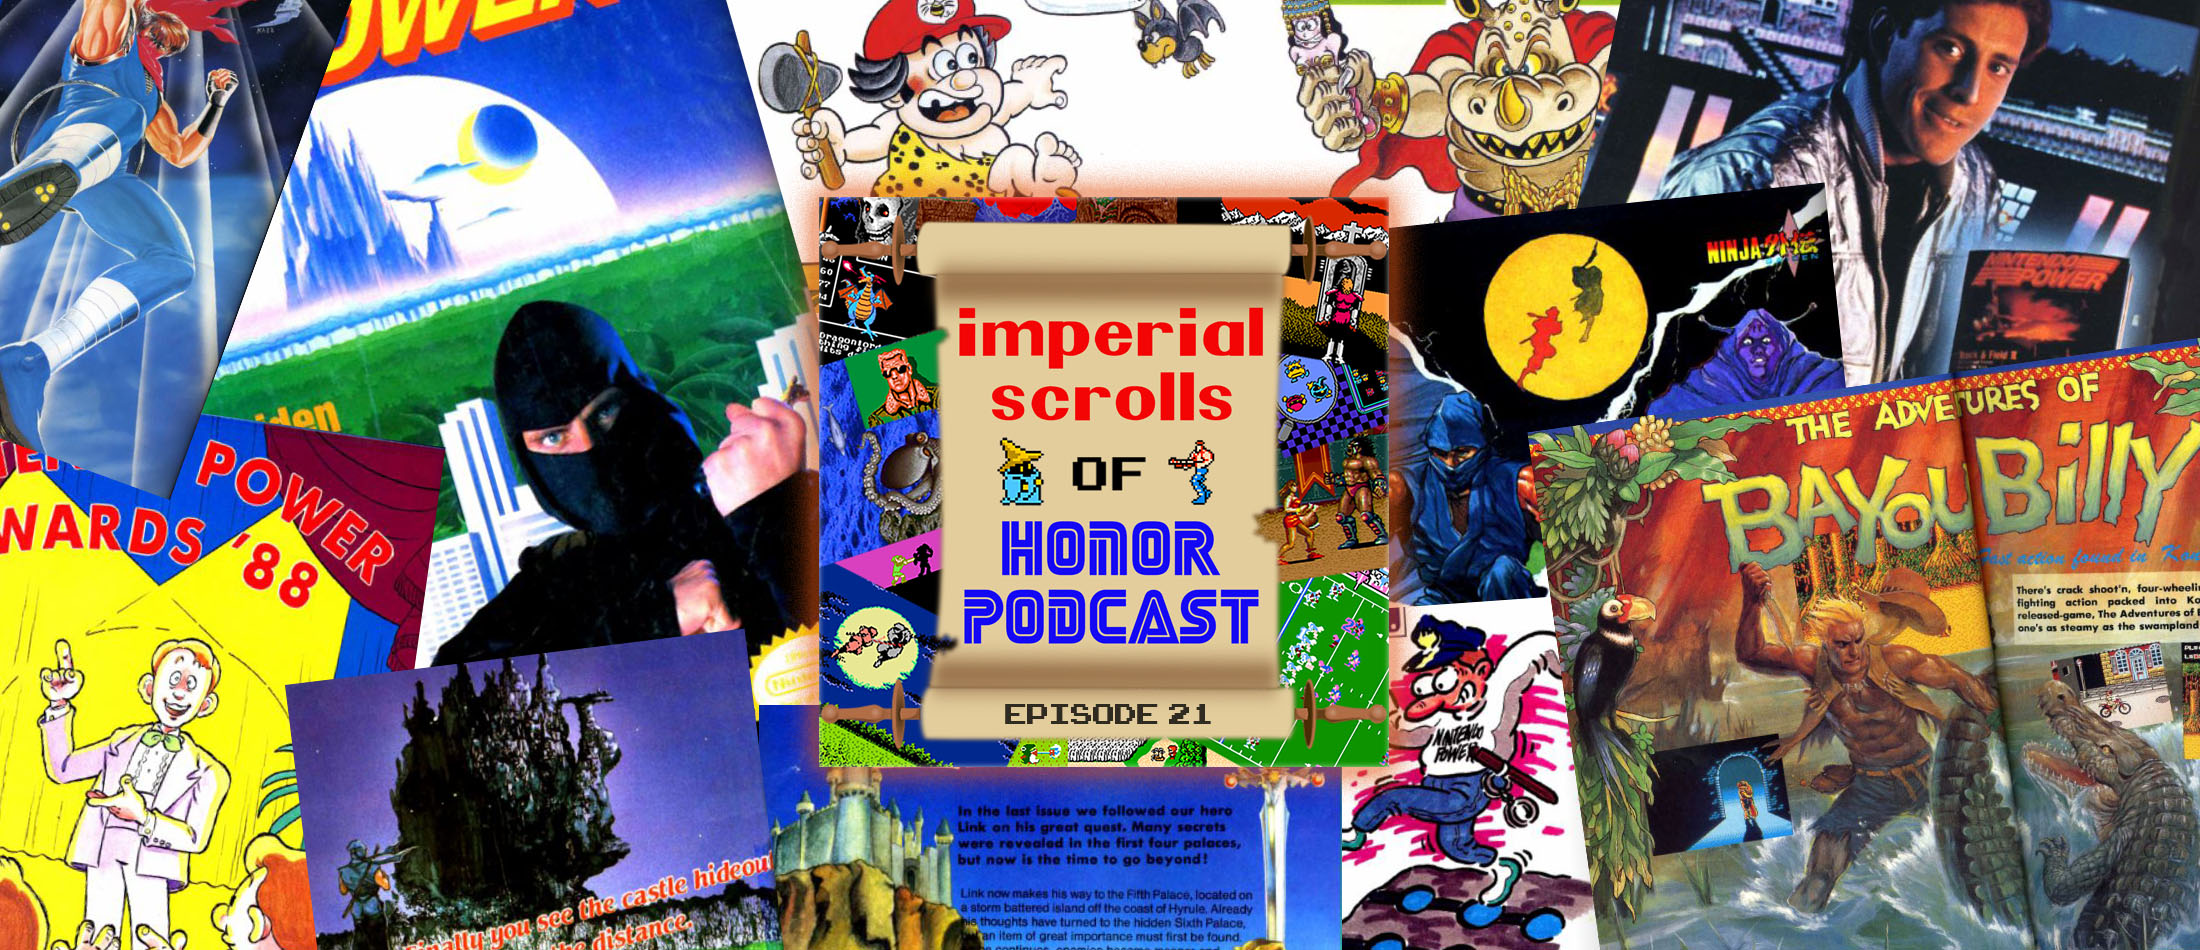 Imperial Scrolls of Honor Podcast - Episode 21 - Nintendo Power #5